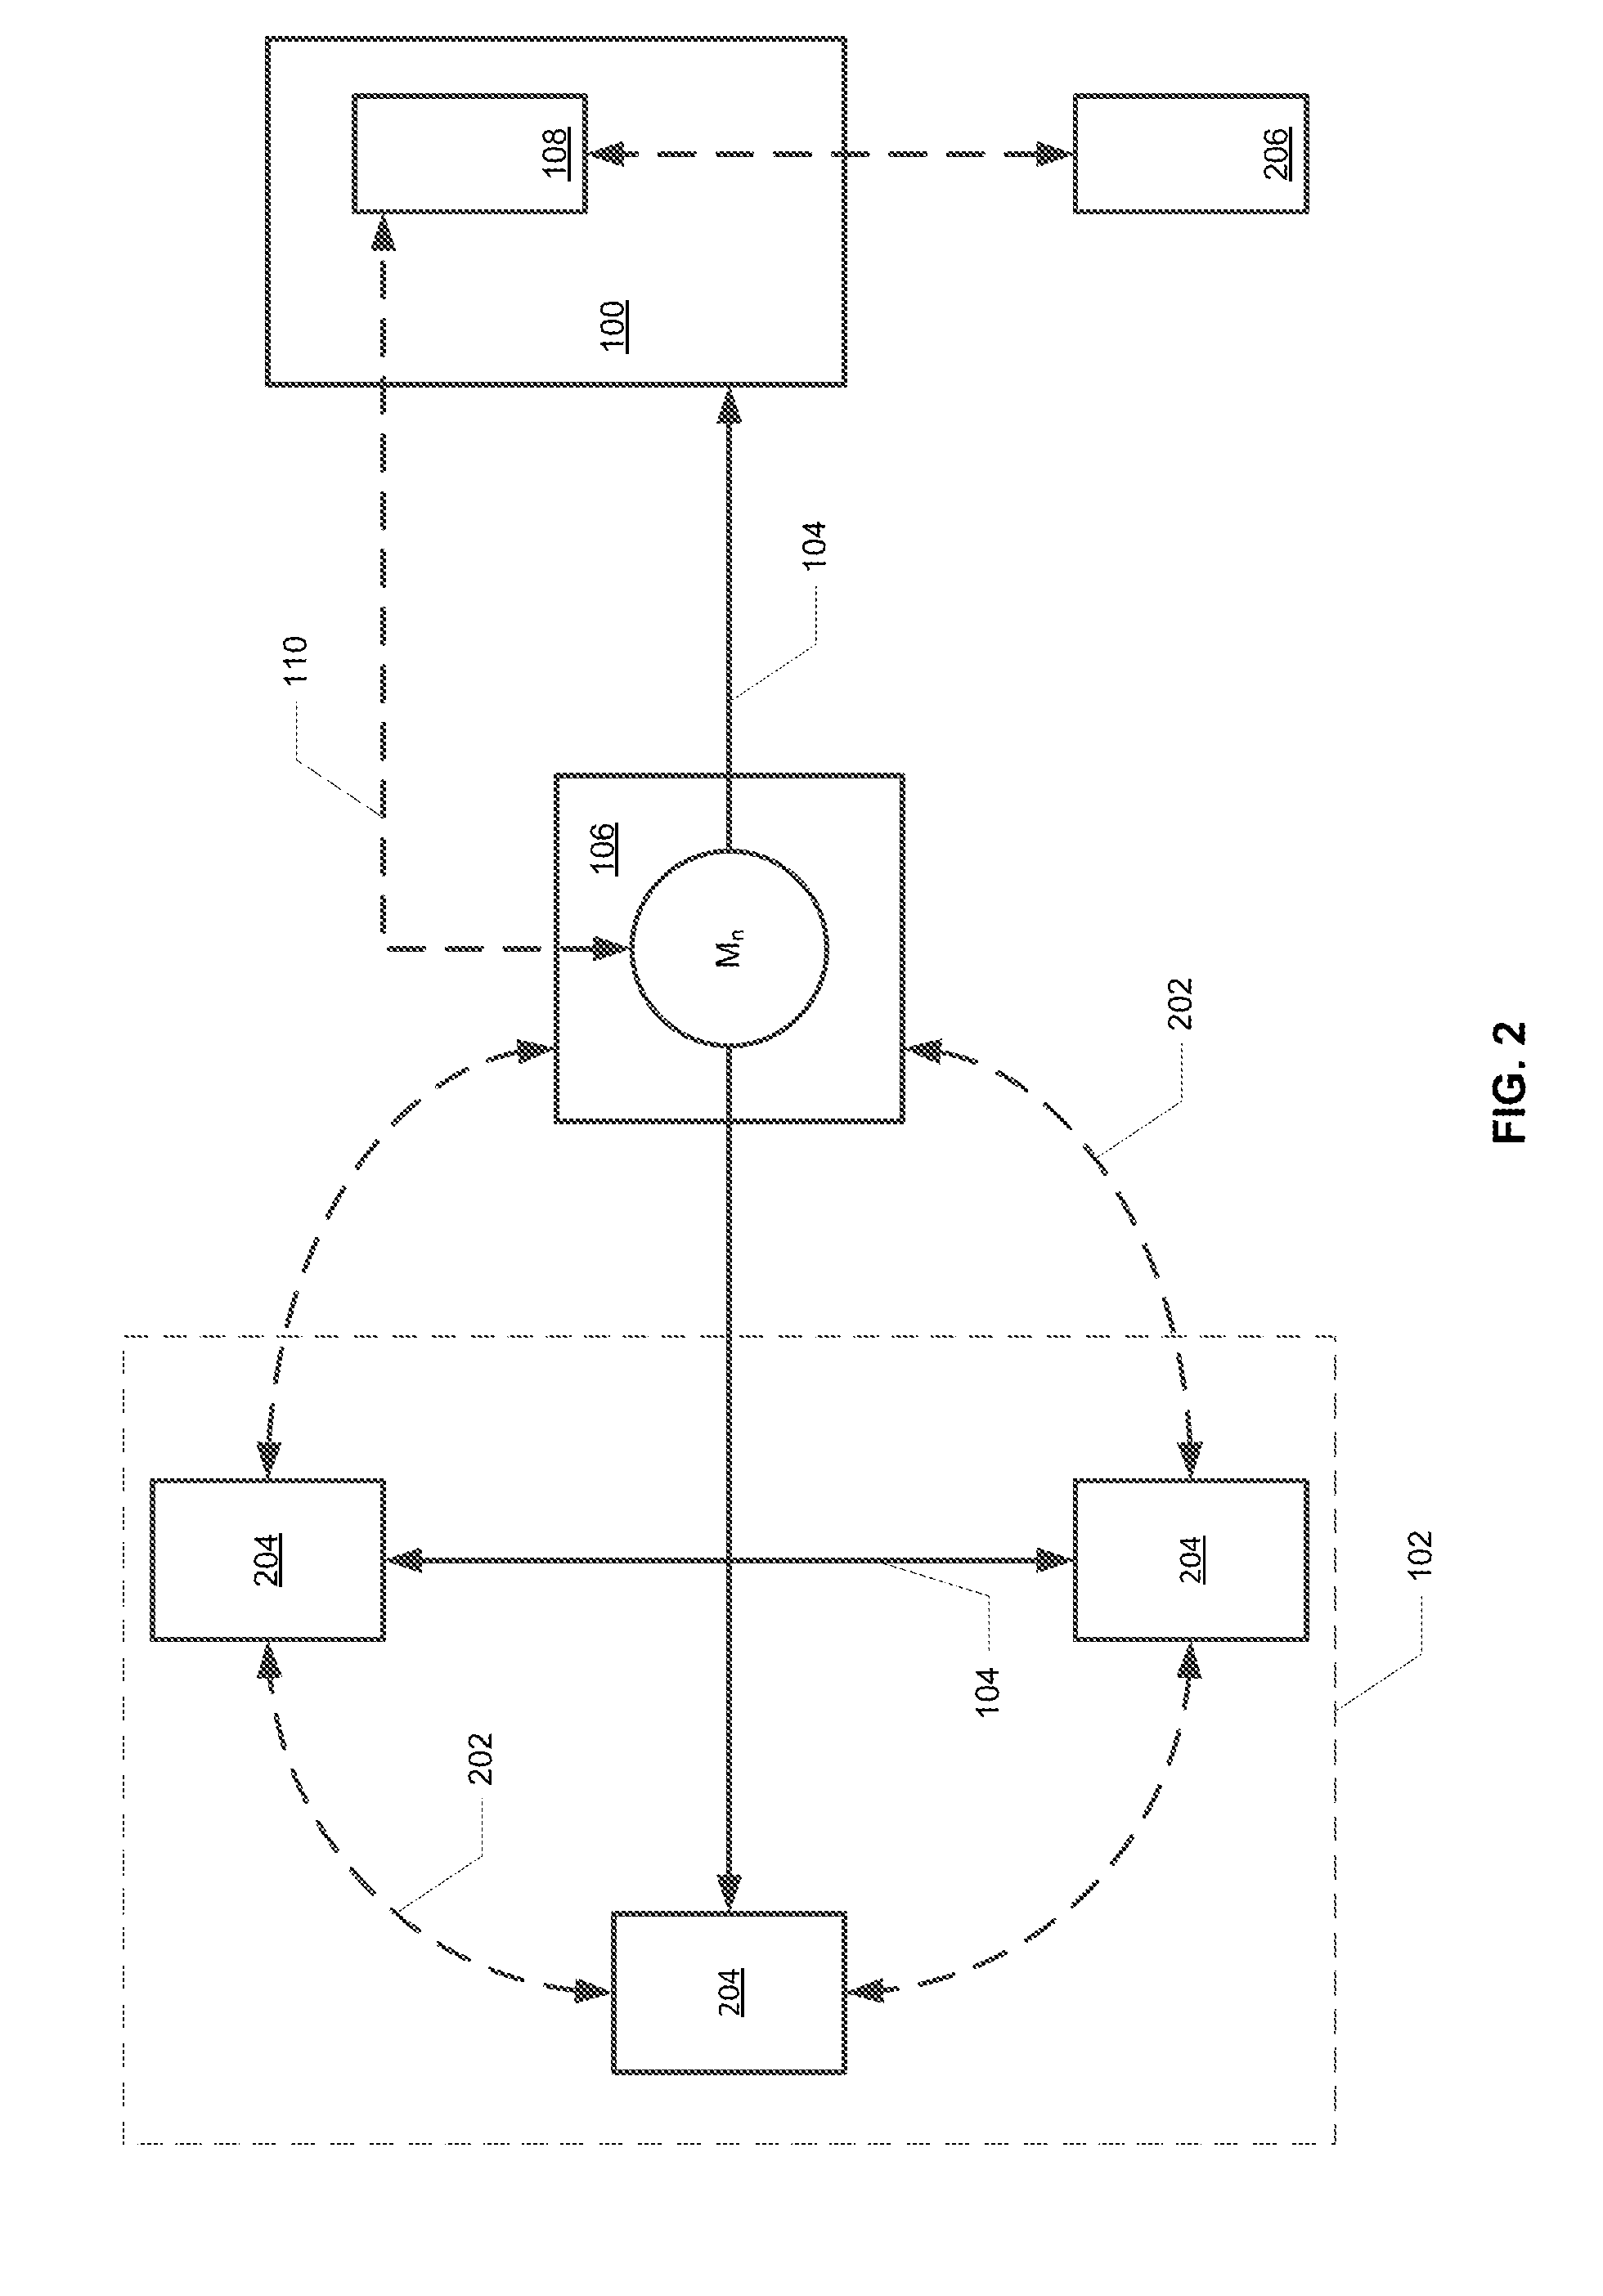 System and method of communication using a smart meter